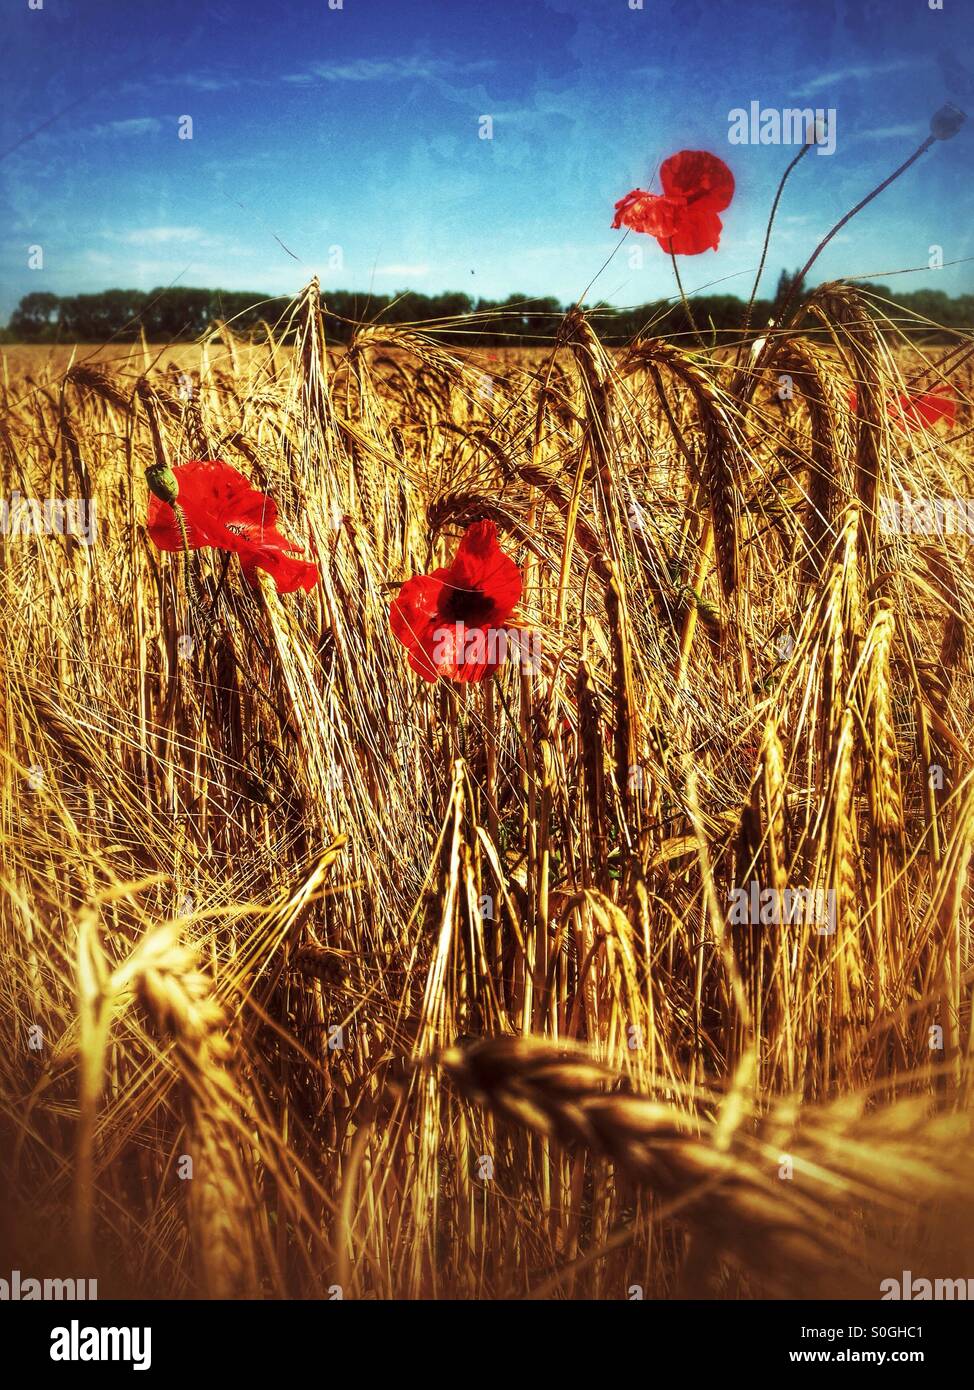 Red poppies in a field of barley. Ancaster, Lincolnshire, England. Stock Photo